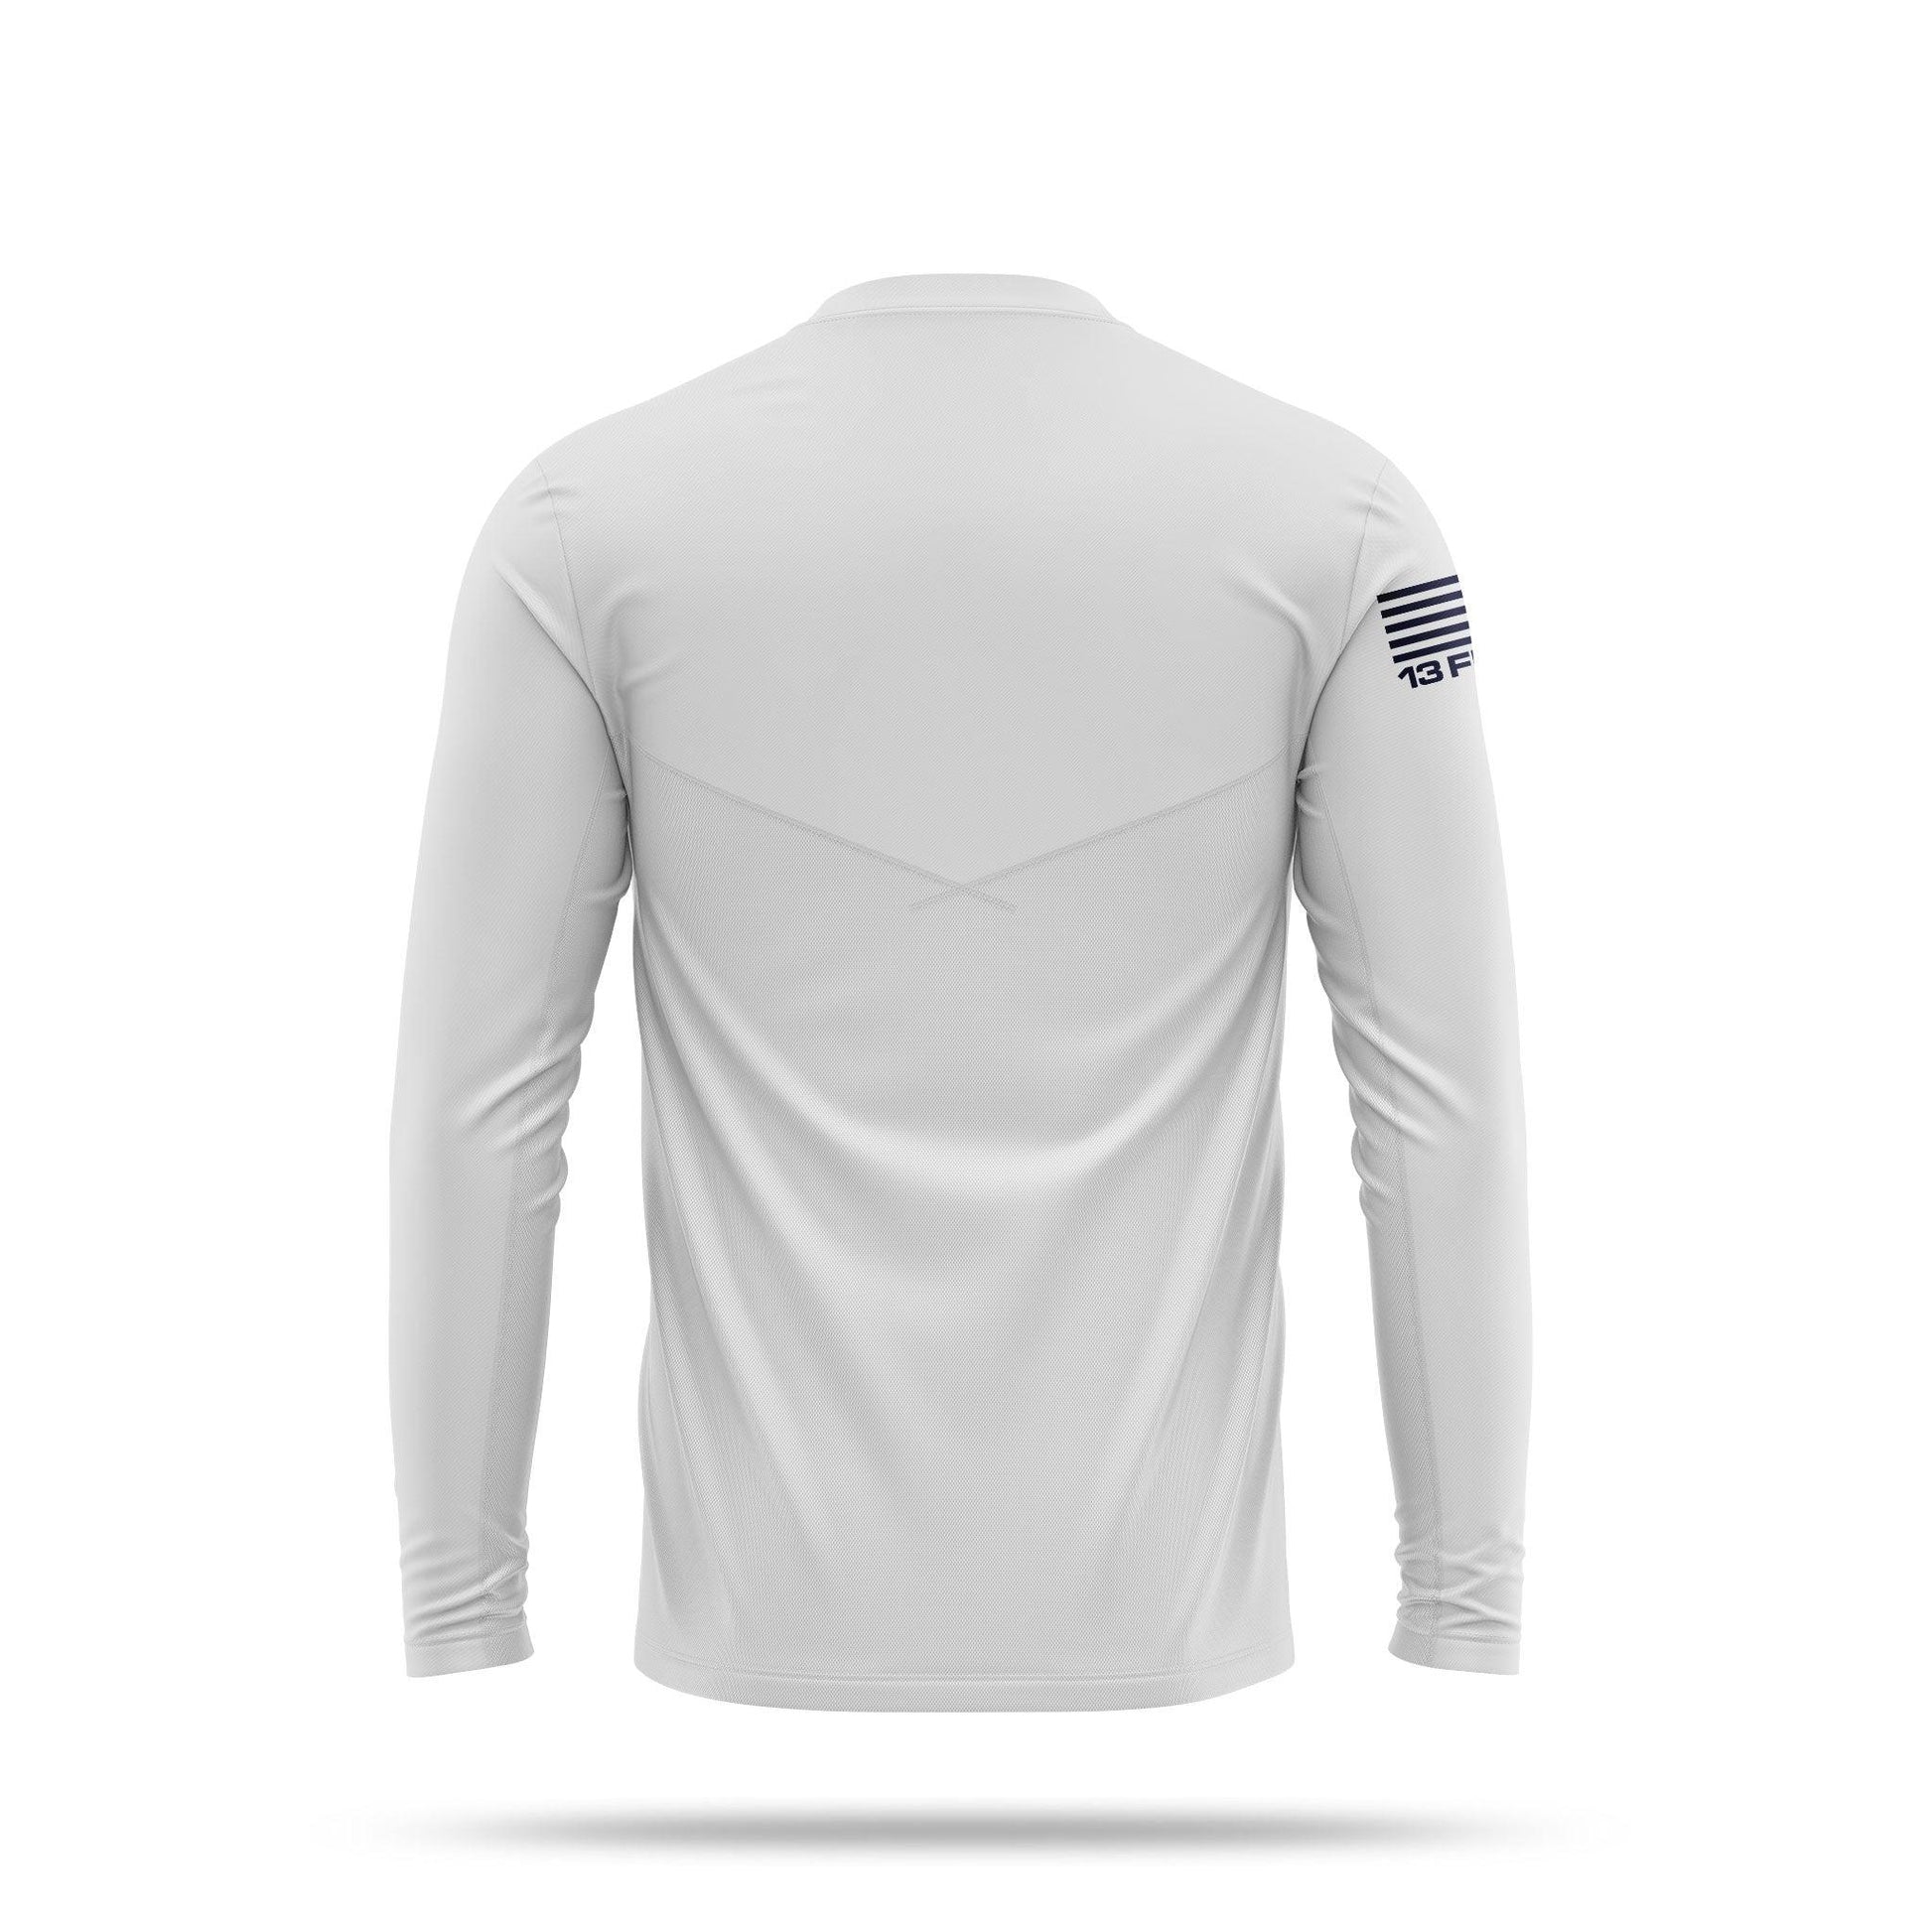 [FOUR OH FOUR] Men's Utility Long Sleeve [WHT/NVY]-13 Fifty Apparel